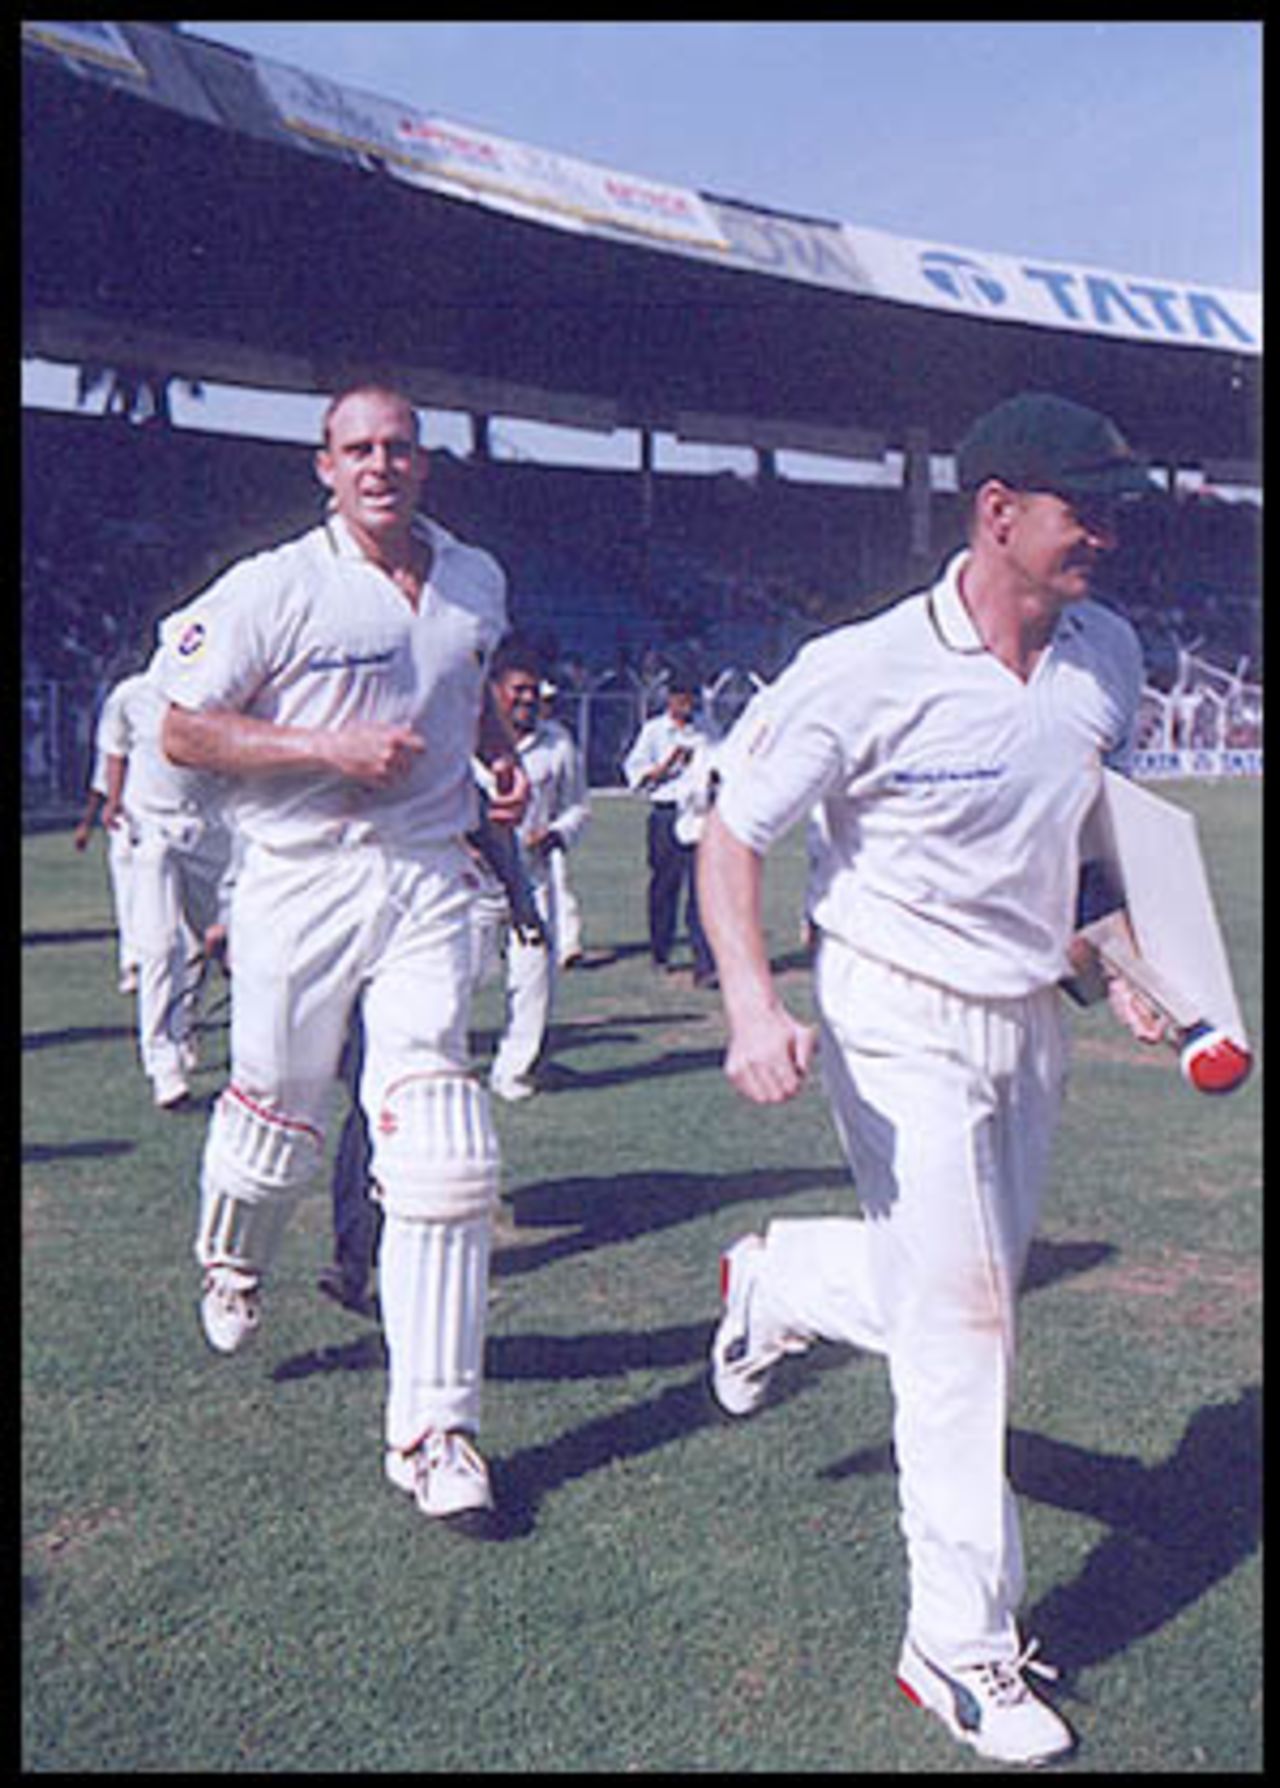 Centurions Gilchrist and Hayden lead the victory lap. Australia in India, 2000/01, 1st Test, India v Australia, Wankhede Stadium, Mumbai, 27Feb-01March 2001 (Day 3).